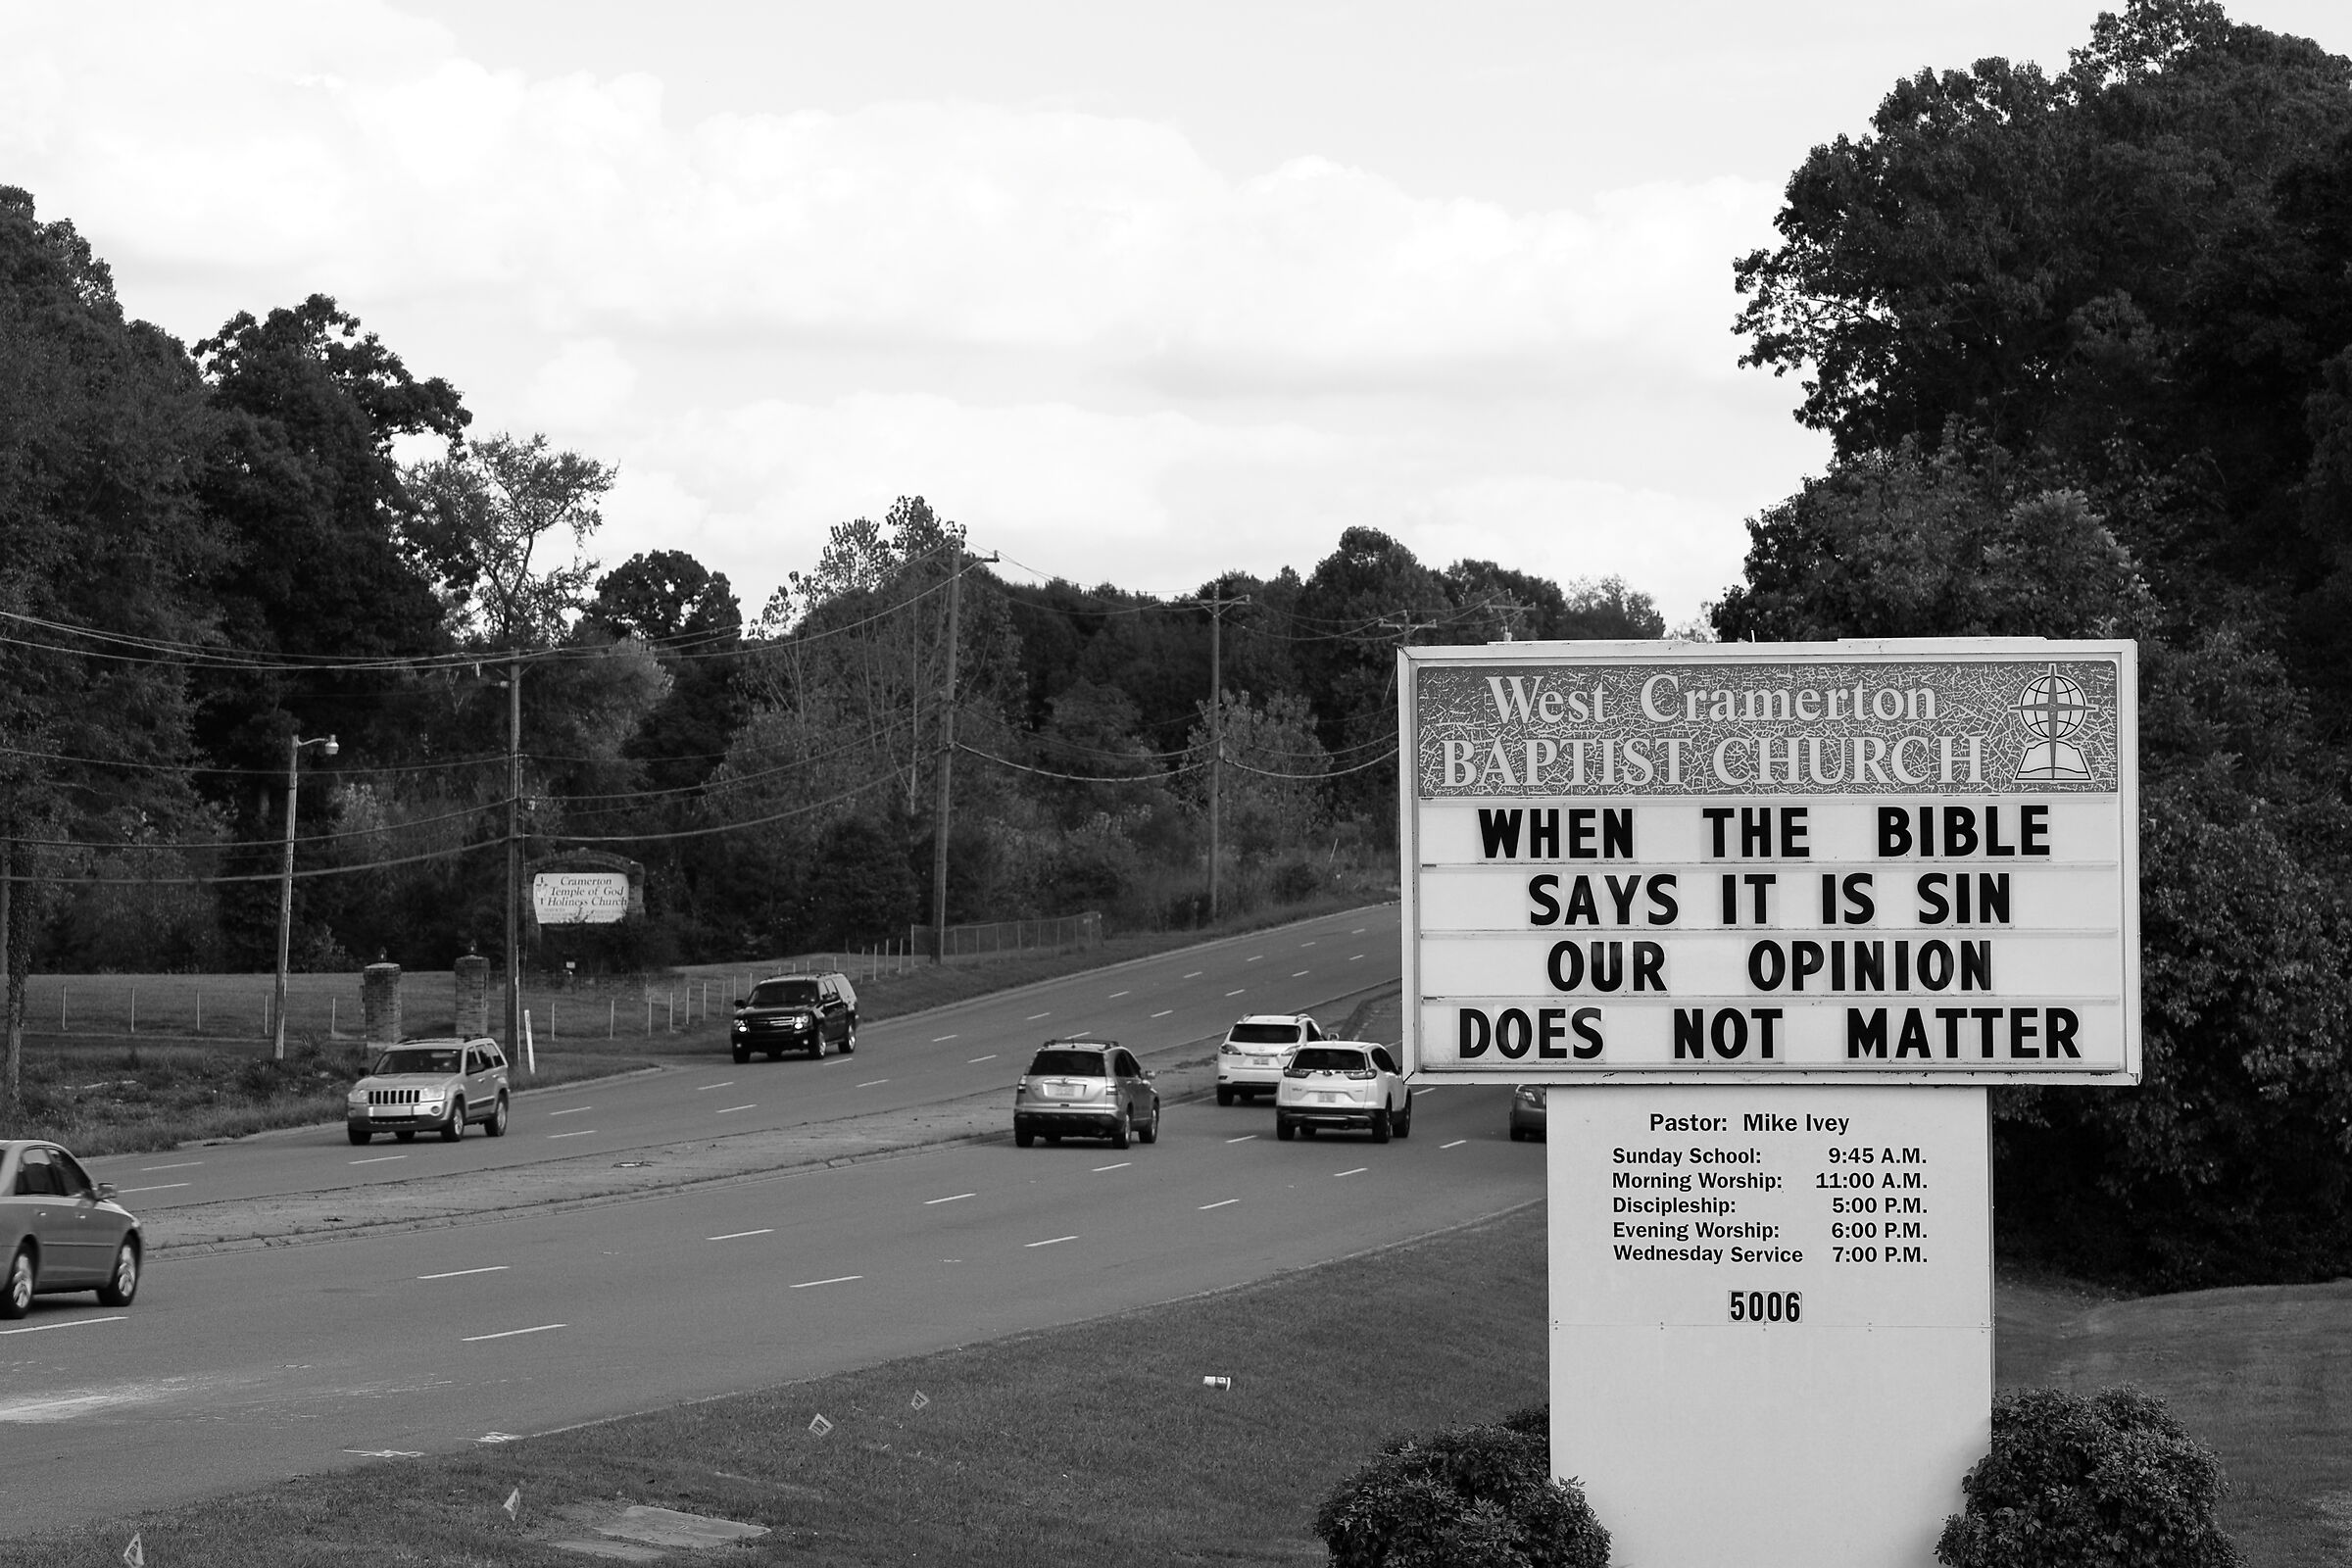 Our opinion does not matter...